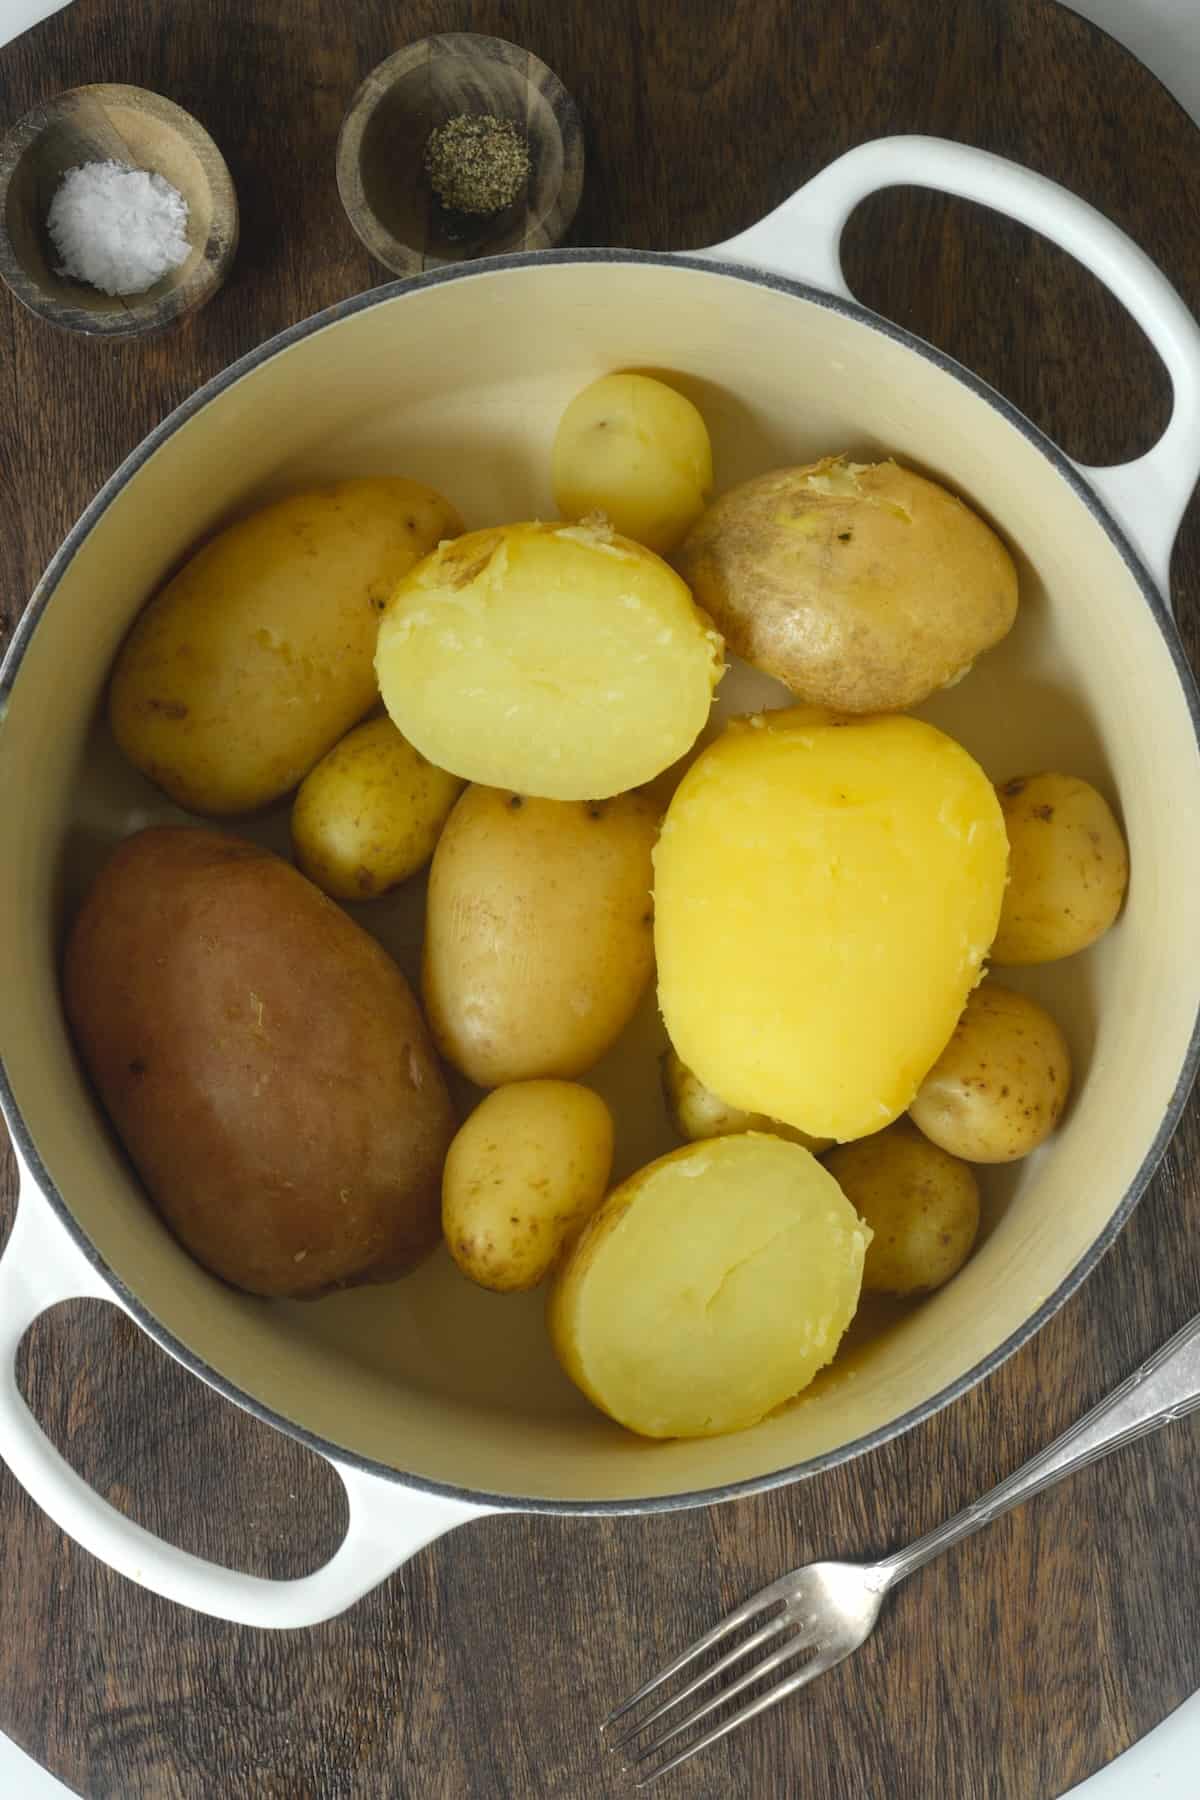 How to tell if potatoes are bad?